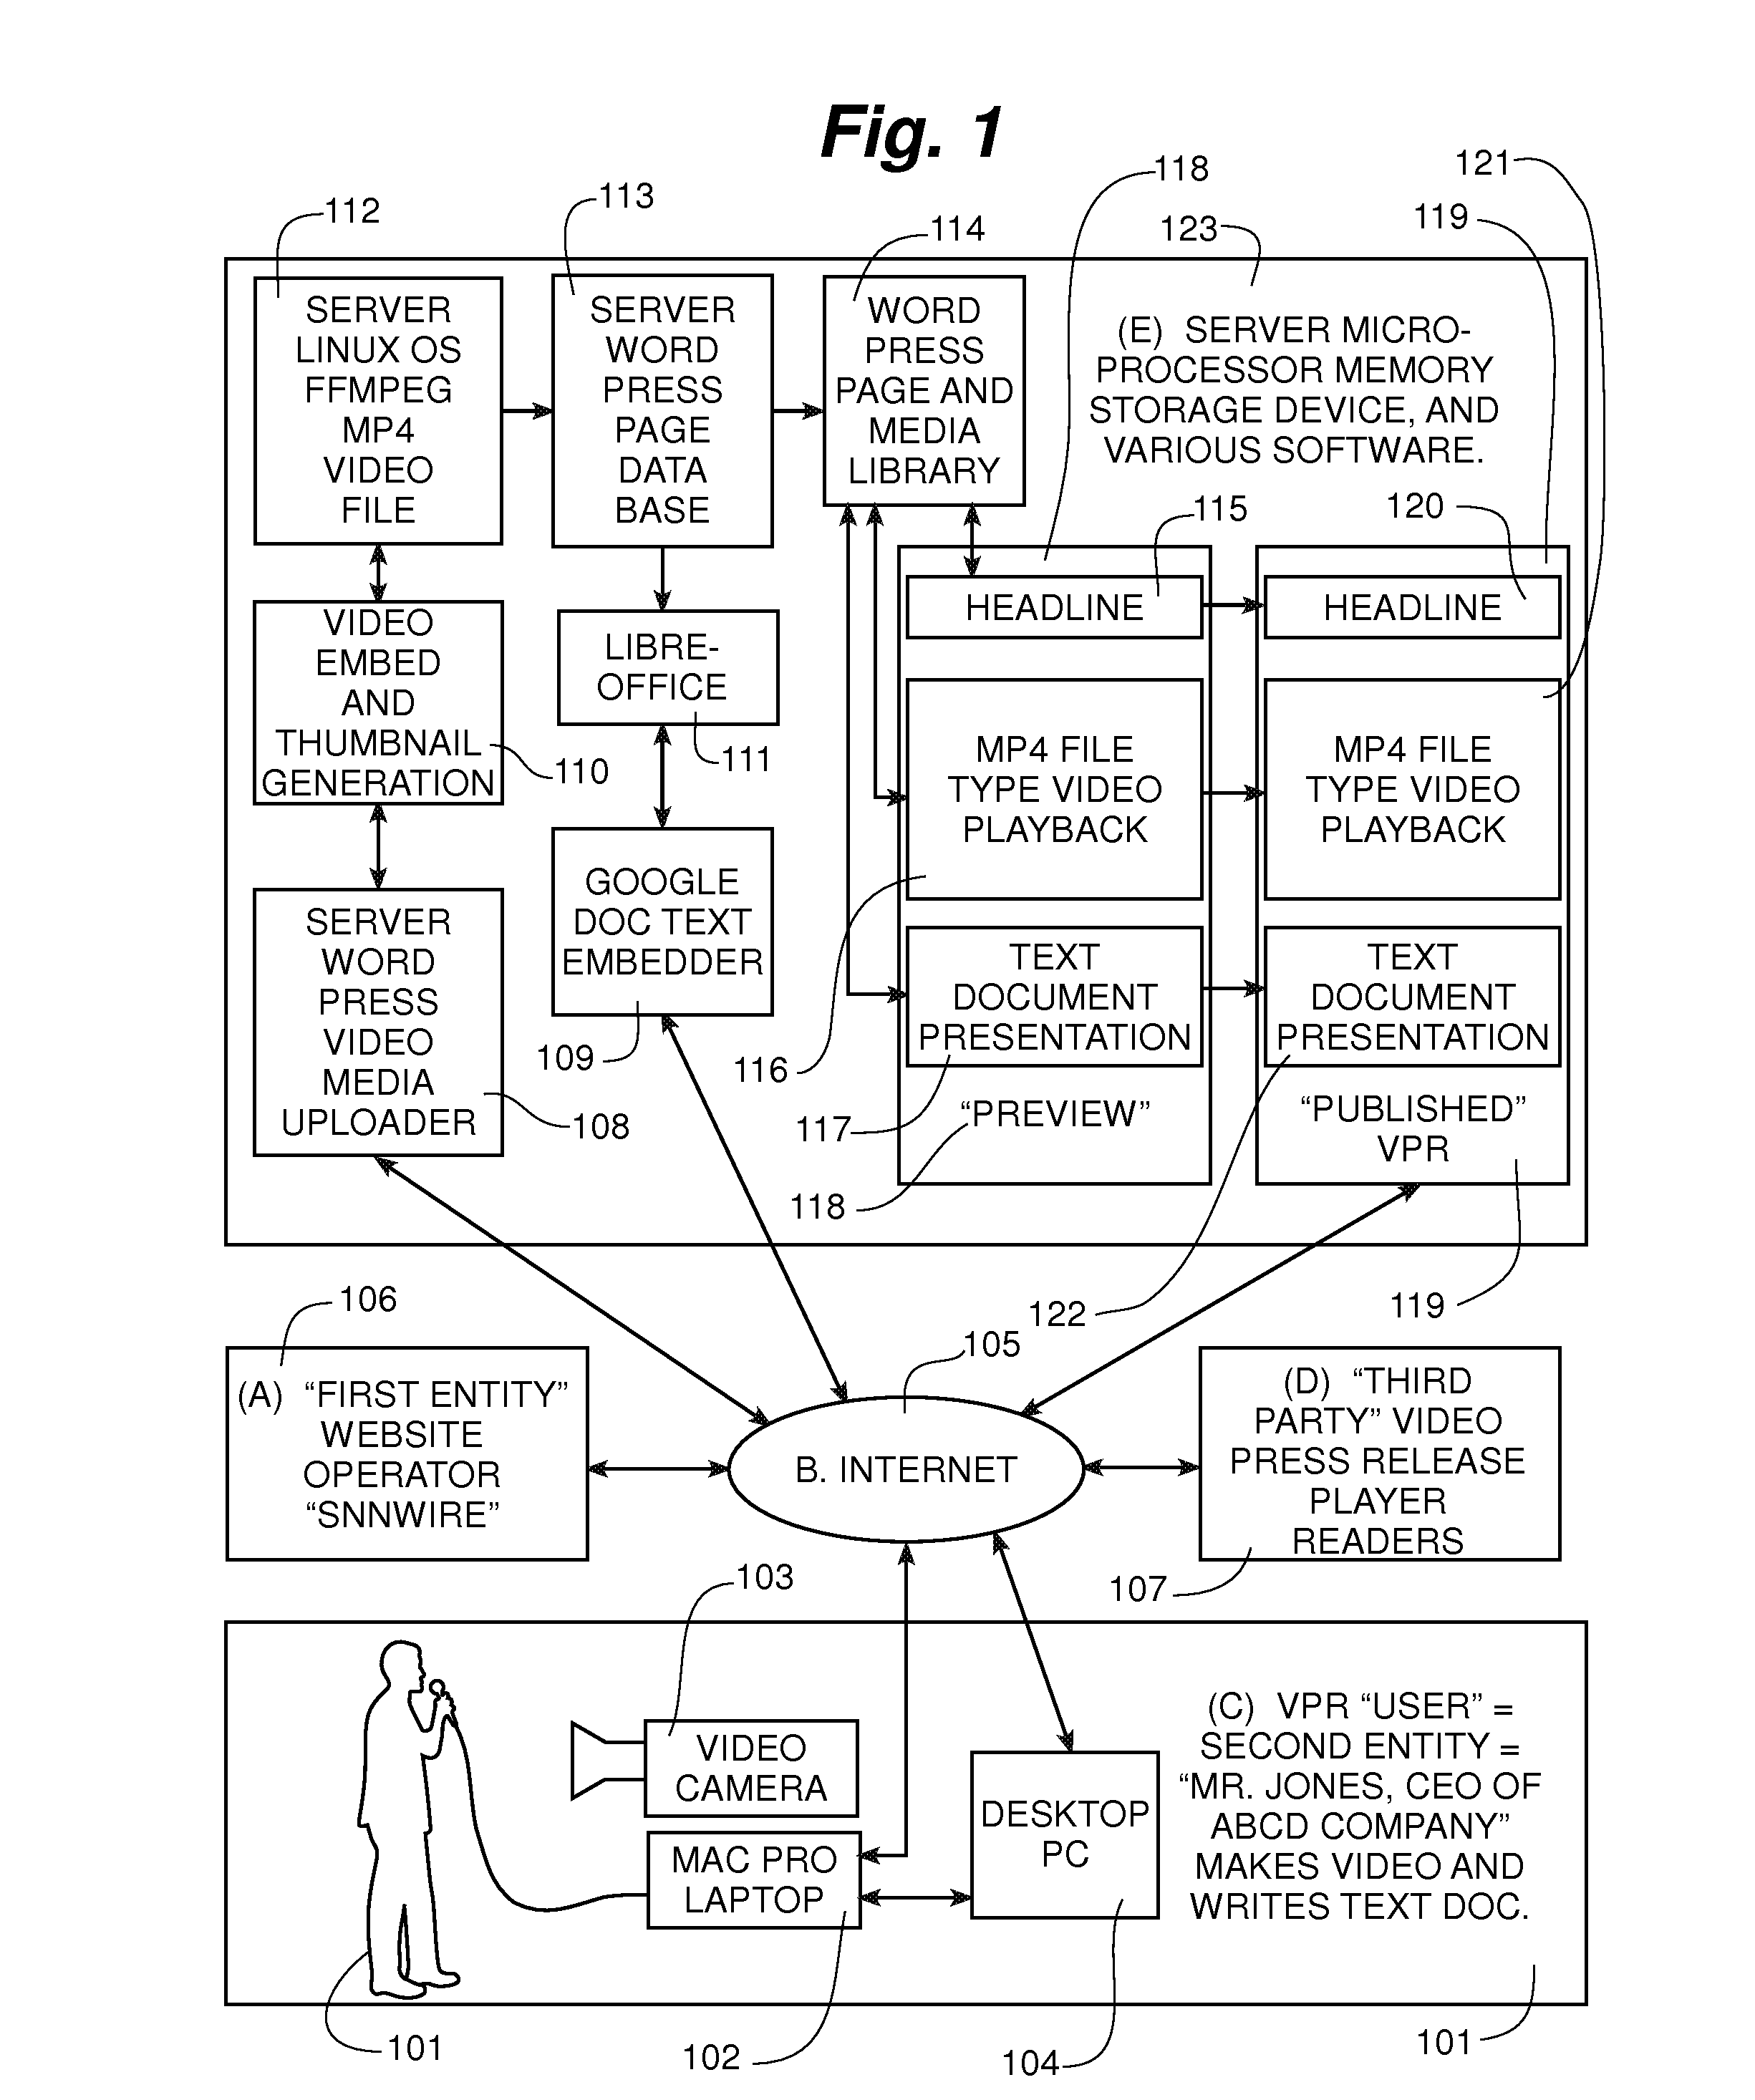 Methods and systems for producing, previewing, and publishing a video press release over an electronic network